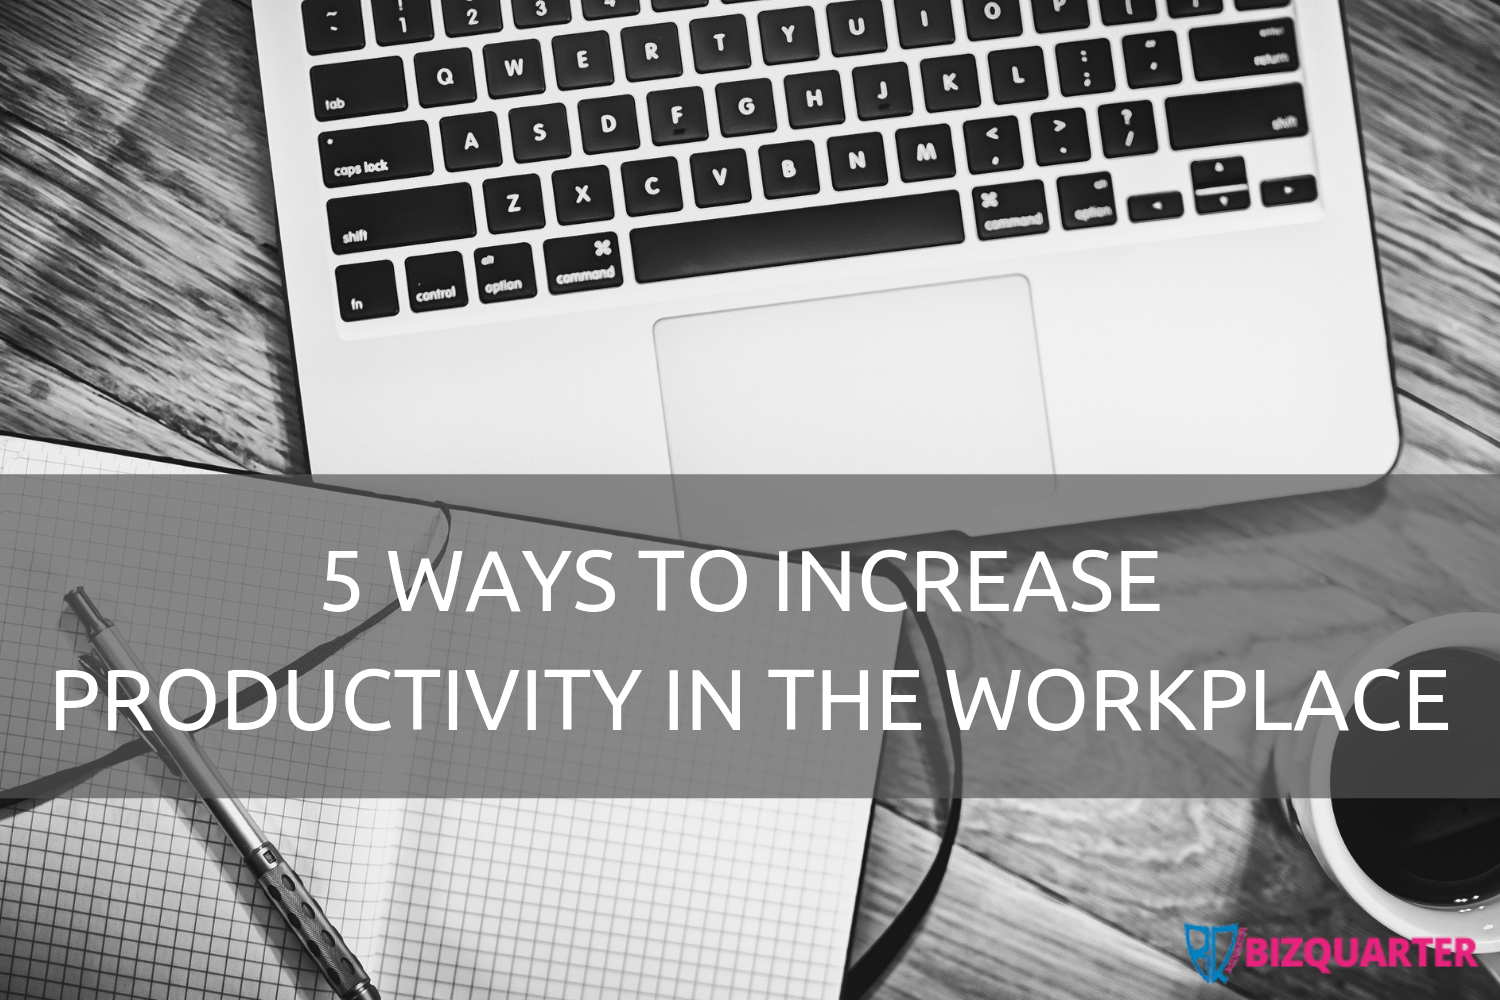 5 ways to increase productivity in the workplace